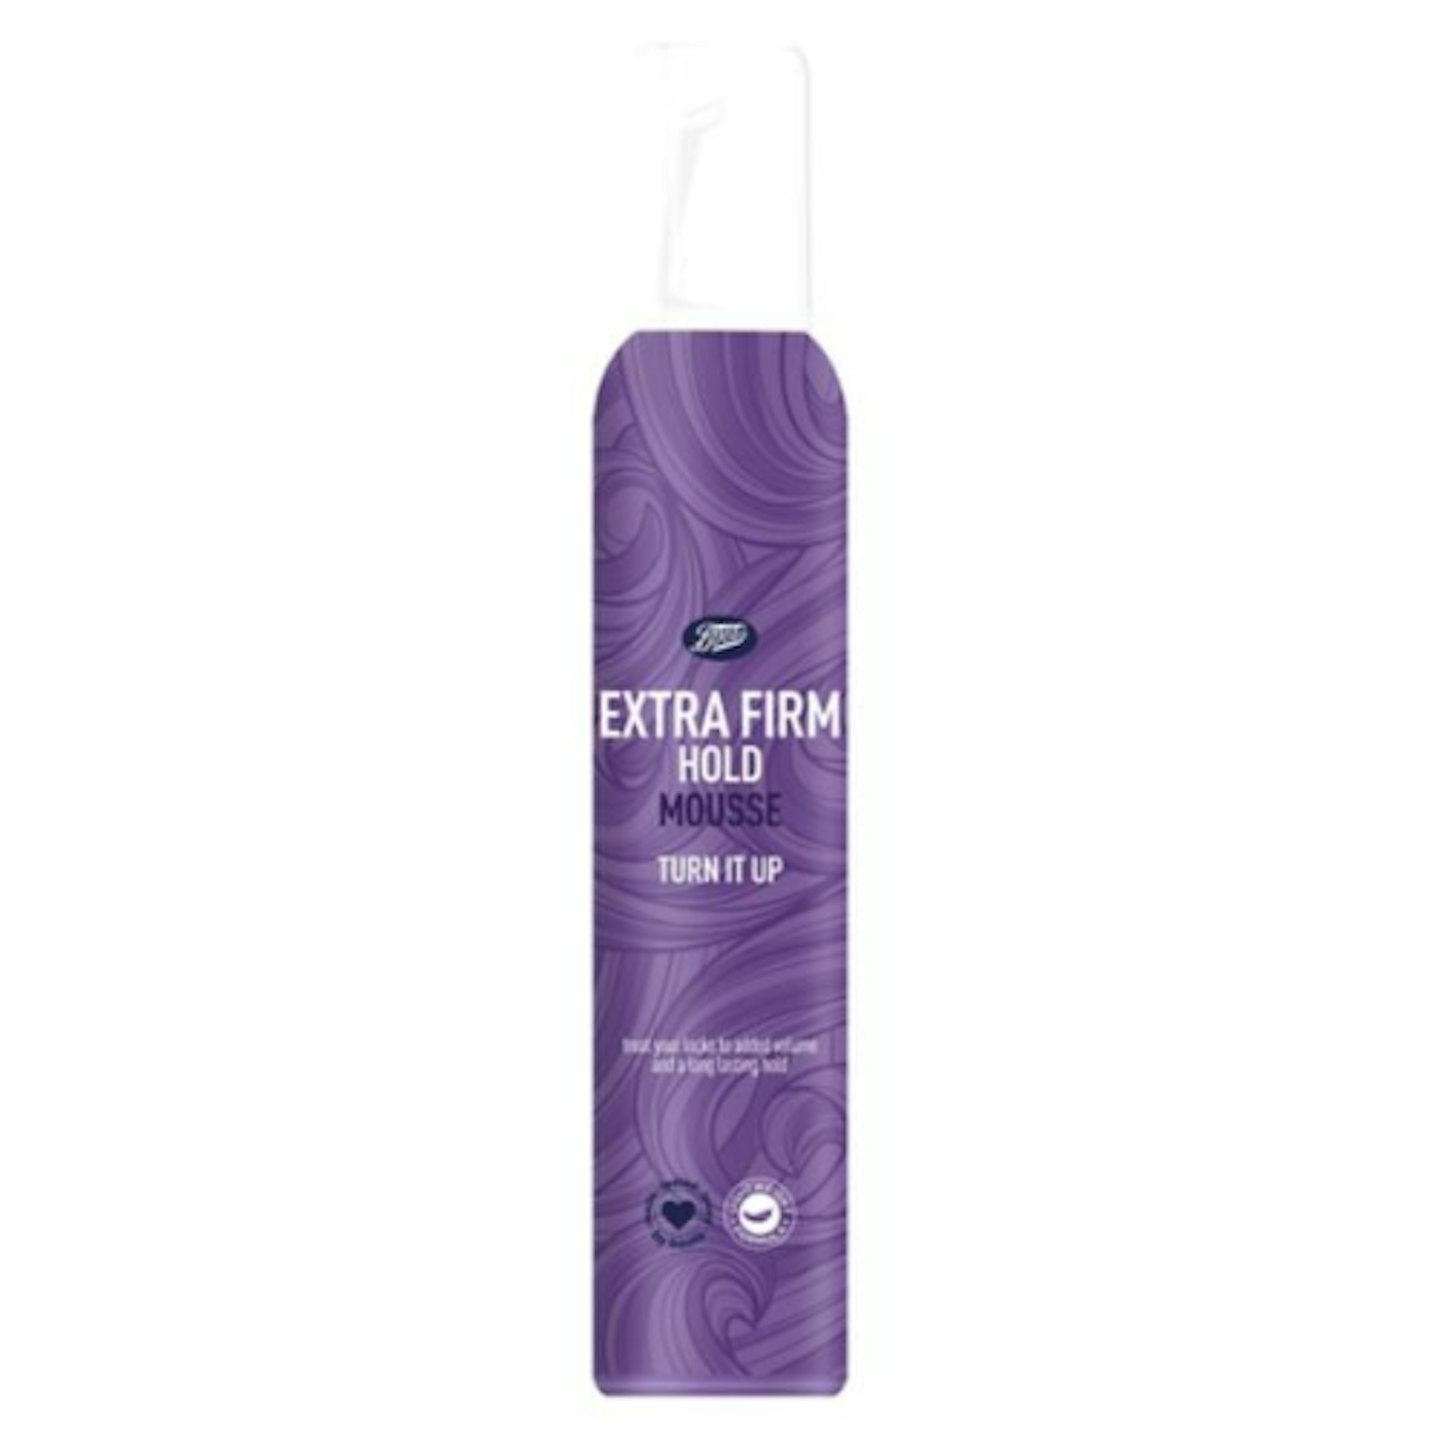 Boots everyday extra firm hold mousse 200ml      